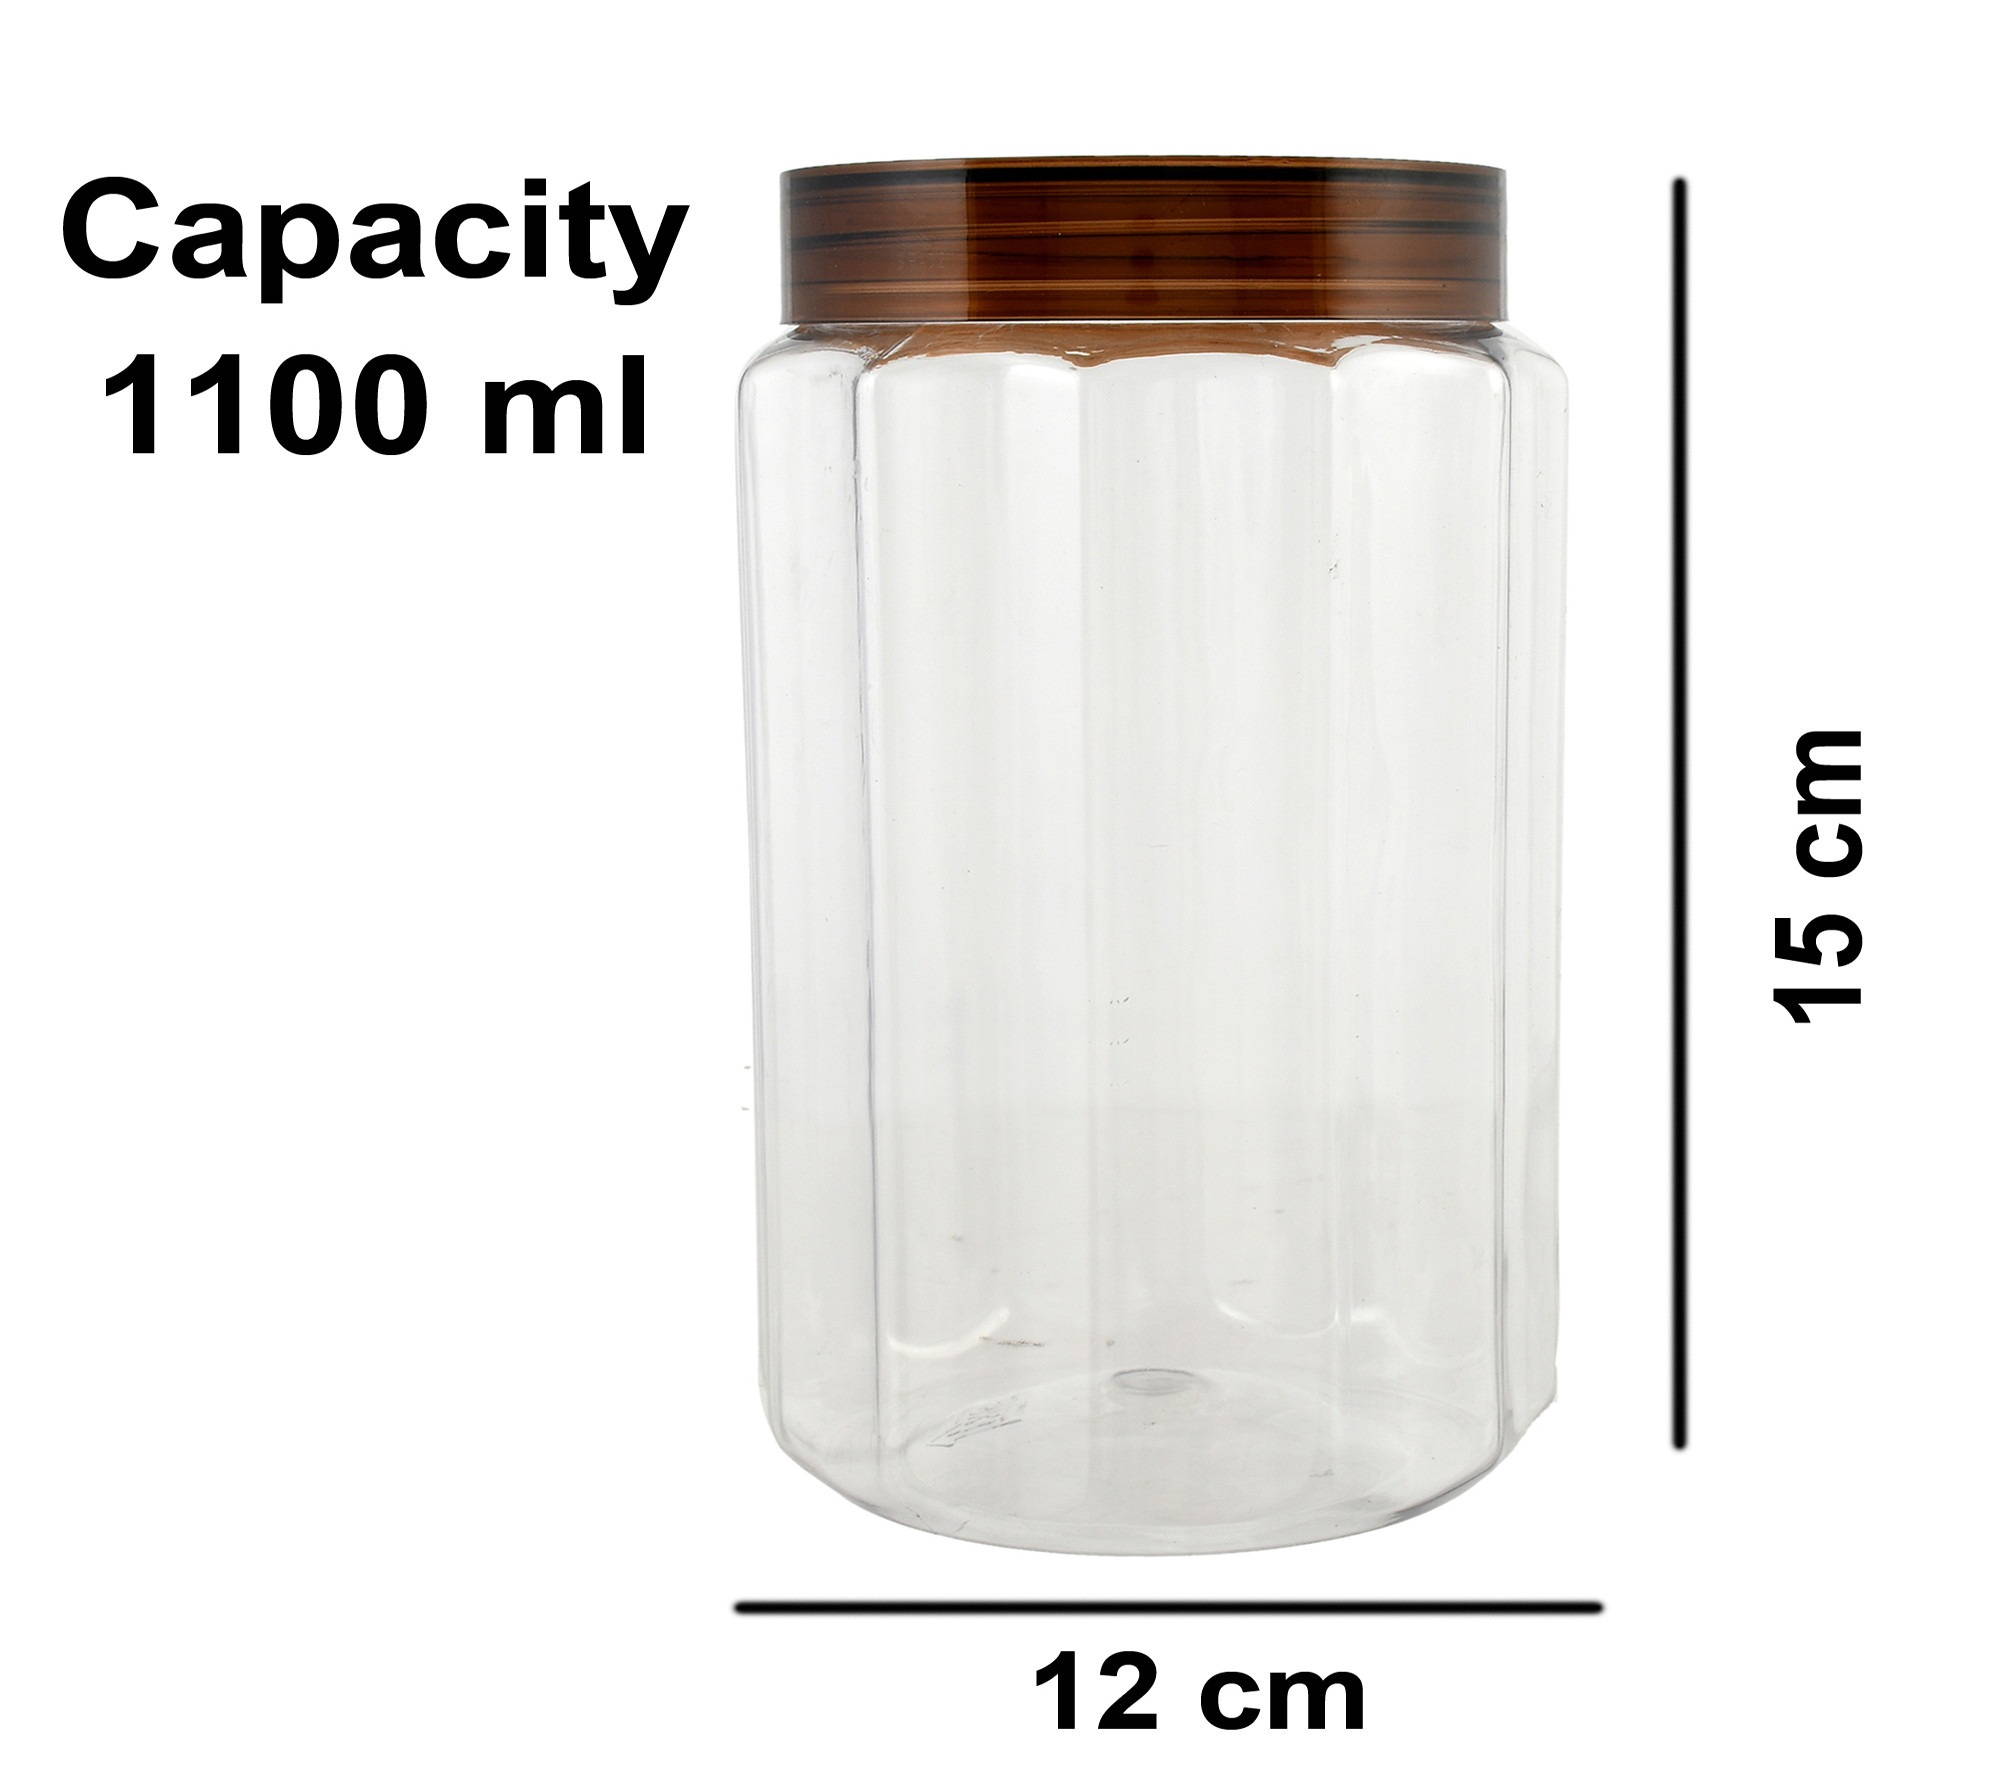 Kuber Industries Opal Airtight Food Storage Containers Kitchen Containers for Storage Set Plastic Storage Box for Kitchen Airtight Containers Storage Jar Set for Kitchen Storage (1100 ml, Brown)